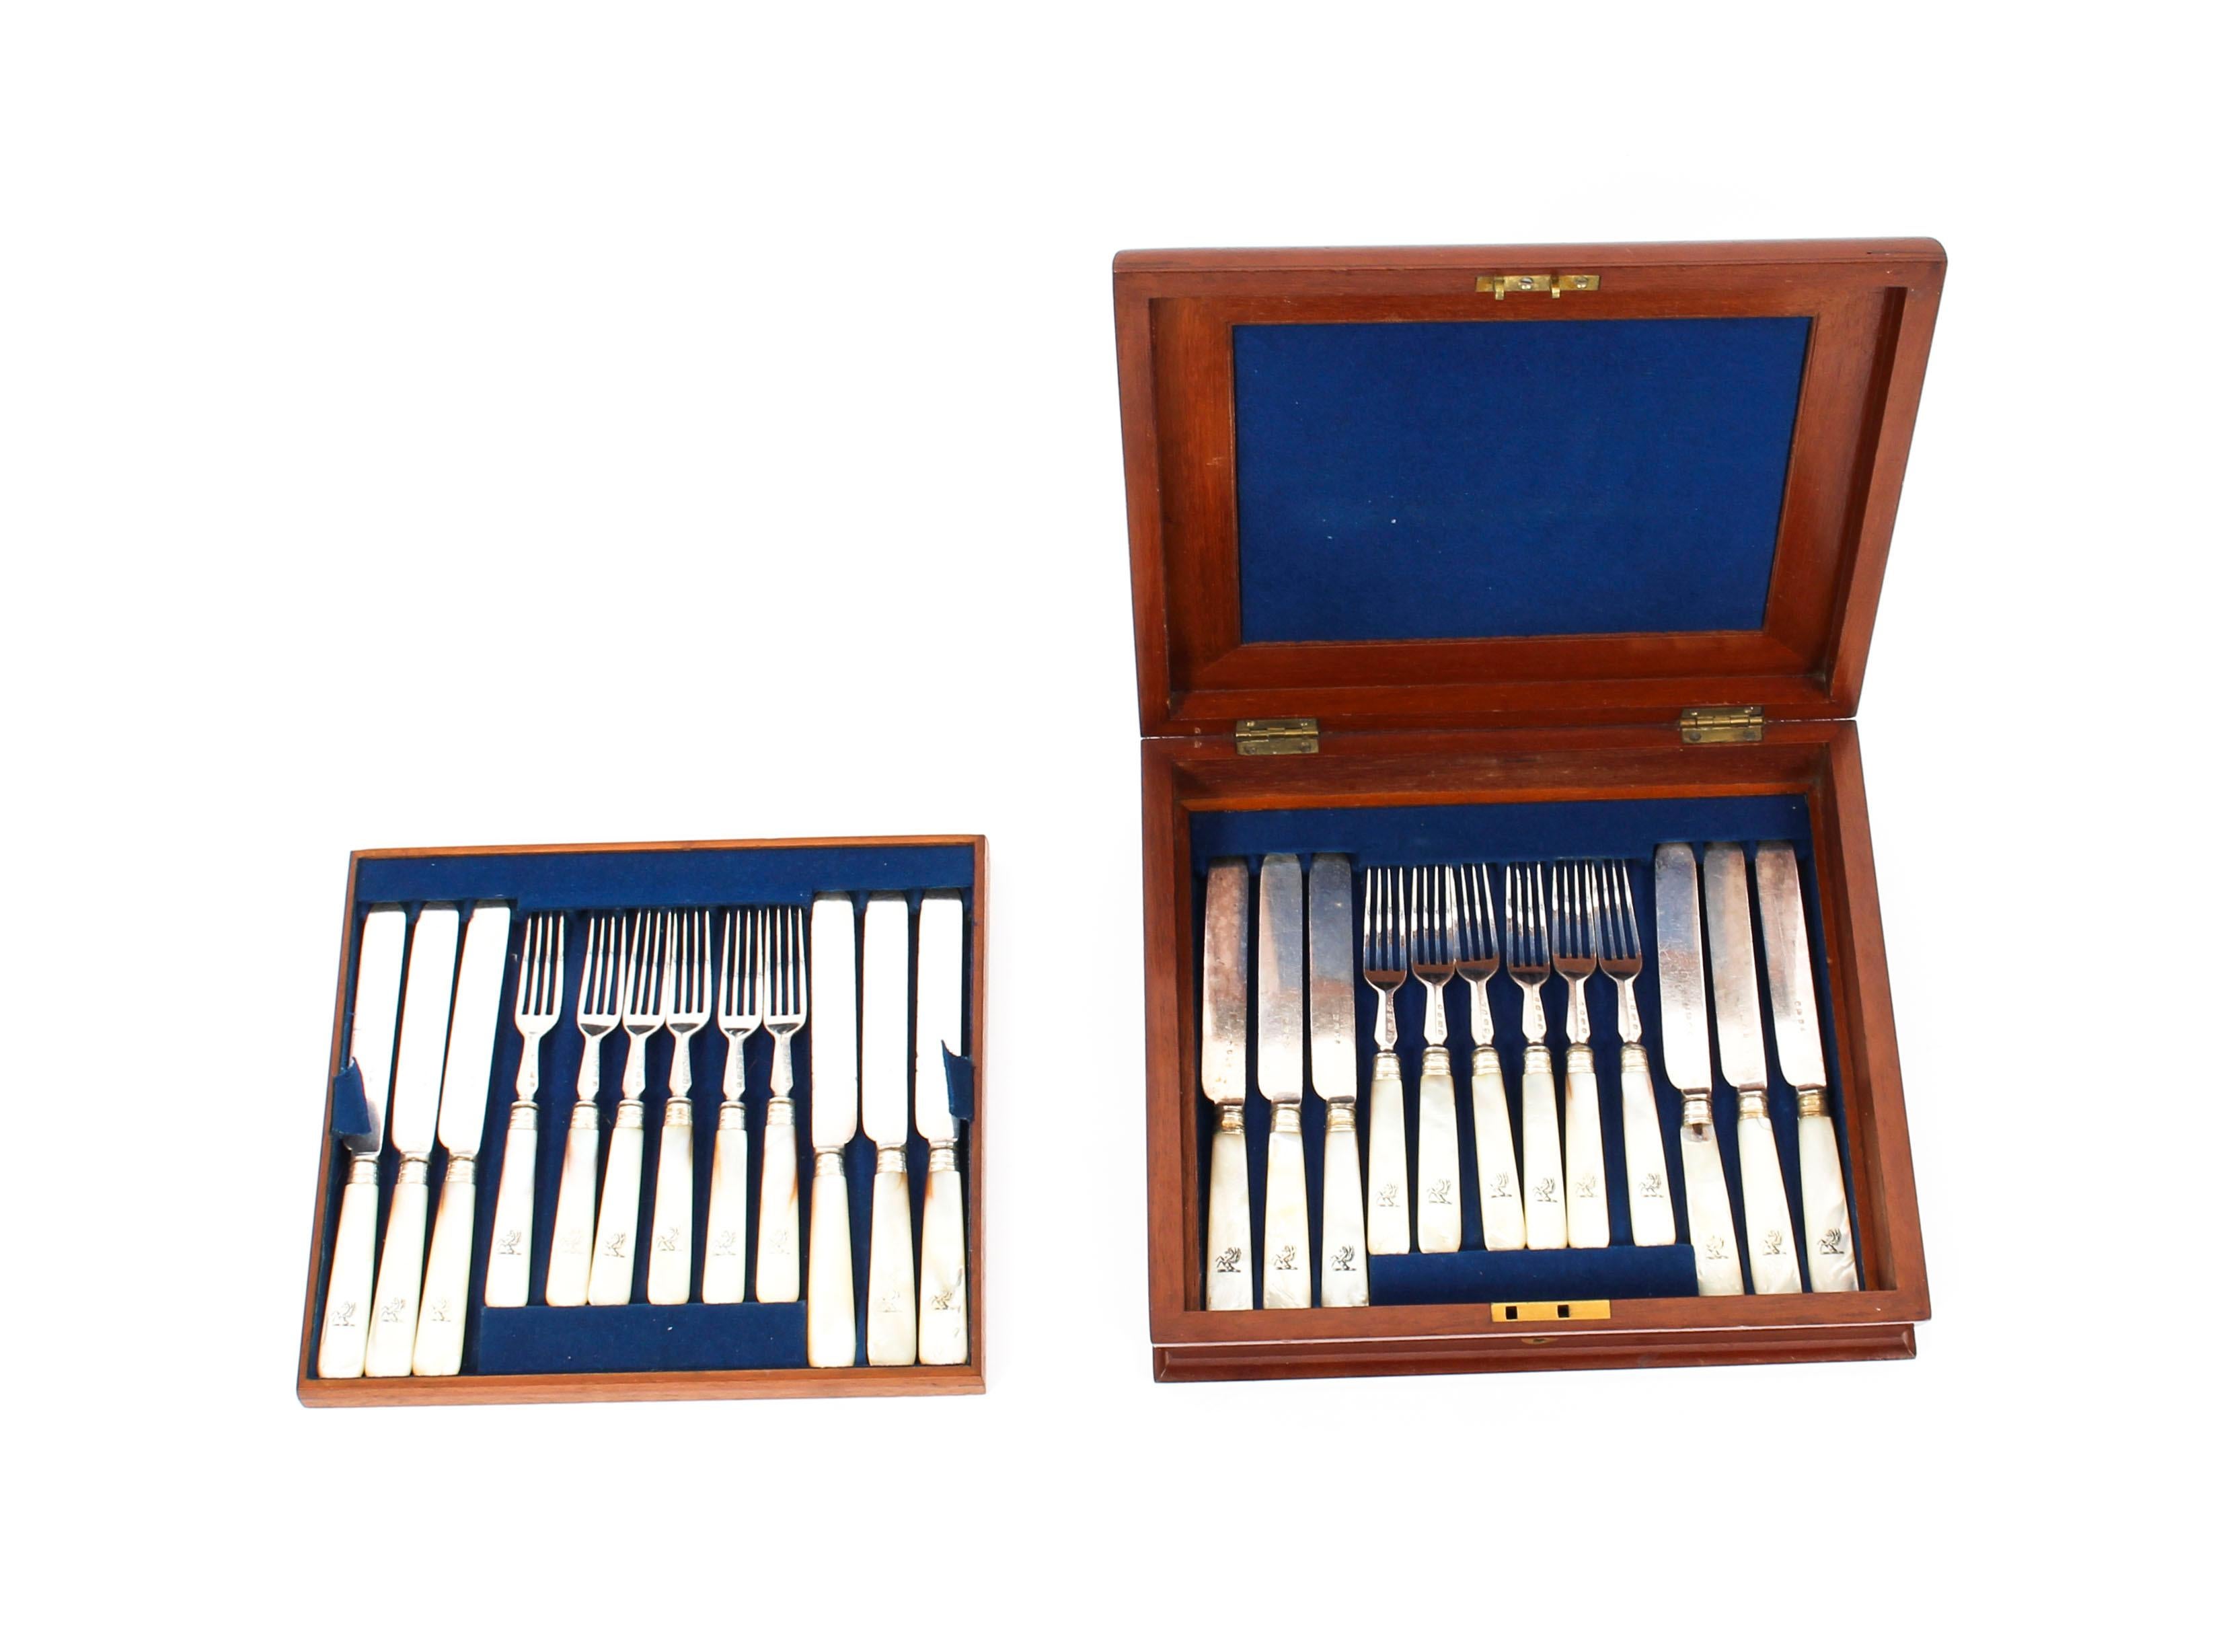 This is a beautiful mahogany two-tier cased set of silver plated and mother of pearl handled dessert knives and forks, circa 1850 in date.

The set is designed in an elegant and elaborate pattern and comprises twelve dessert knives and twelve